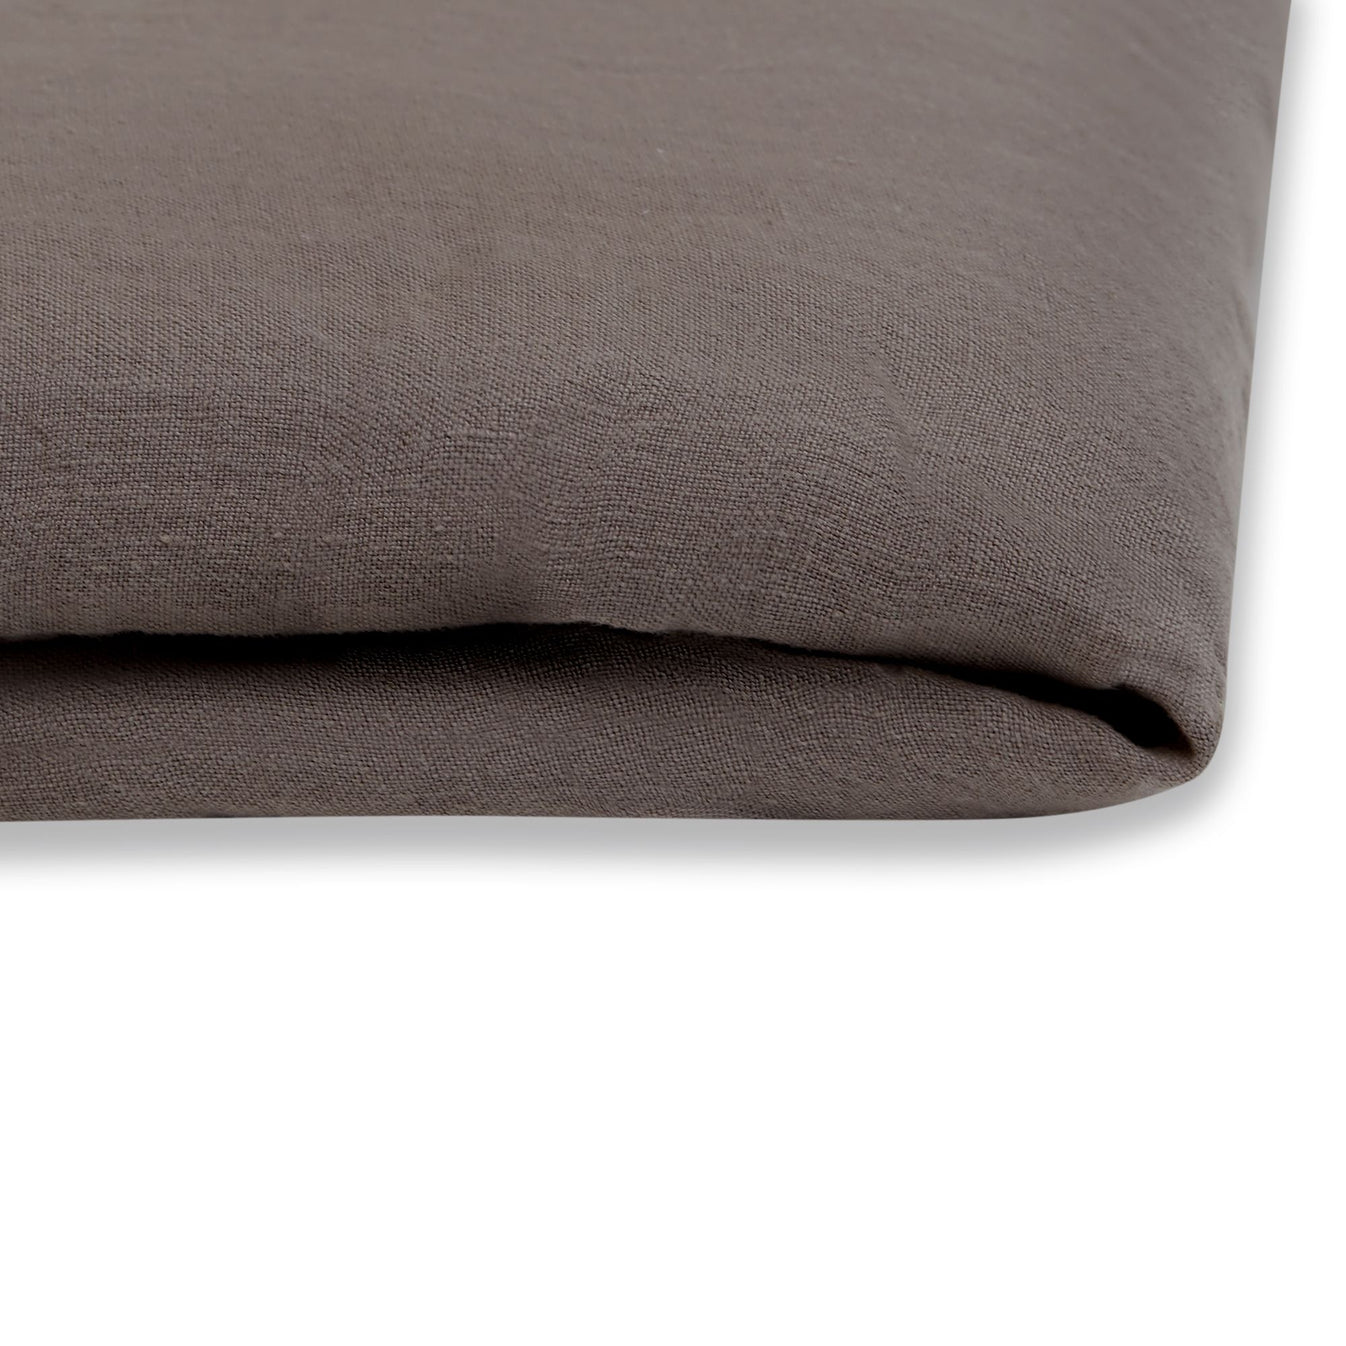 Dim Gray Washed Linen Duvet Cover